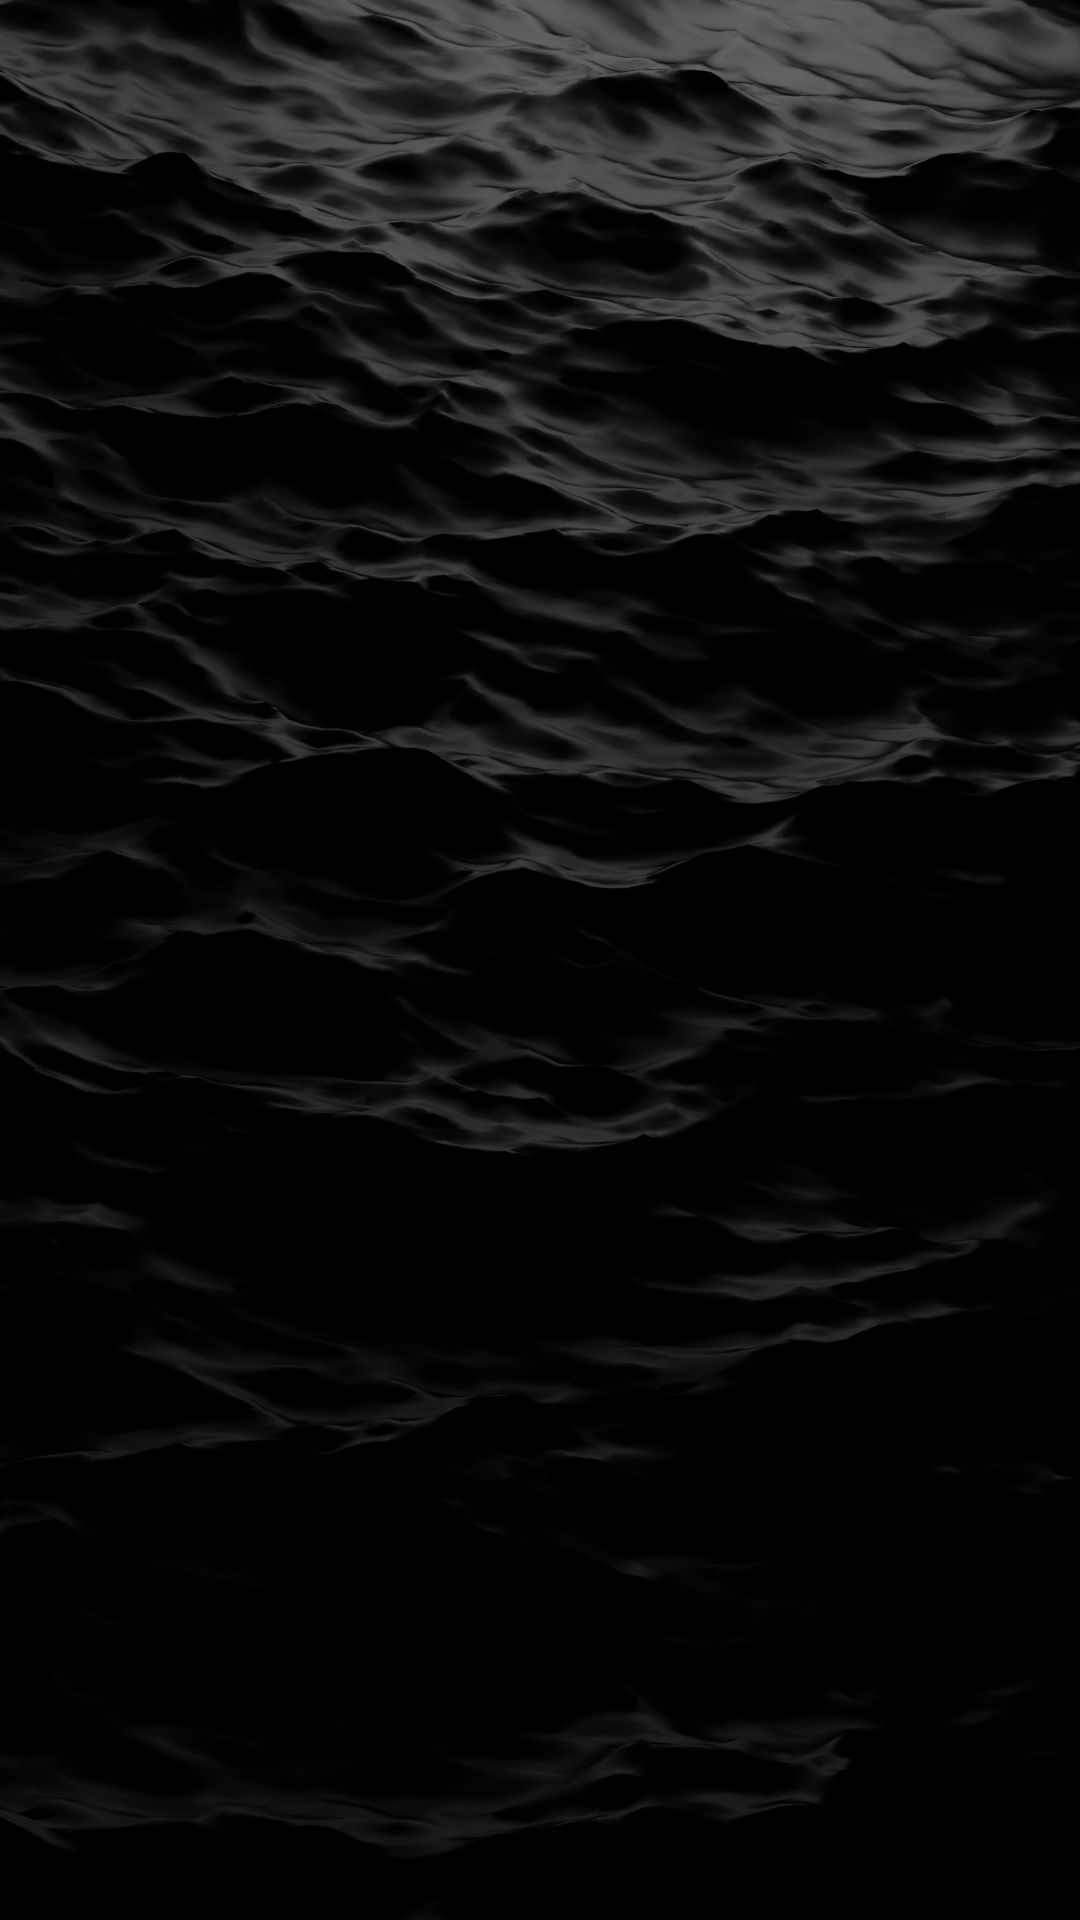 Picturesque Solid Black iPhone Wallpaper If You Have A Or